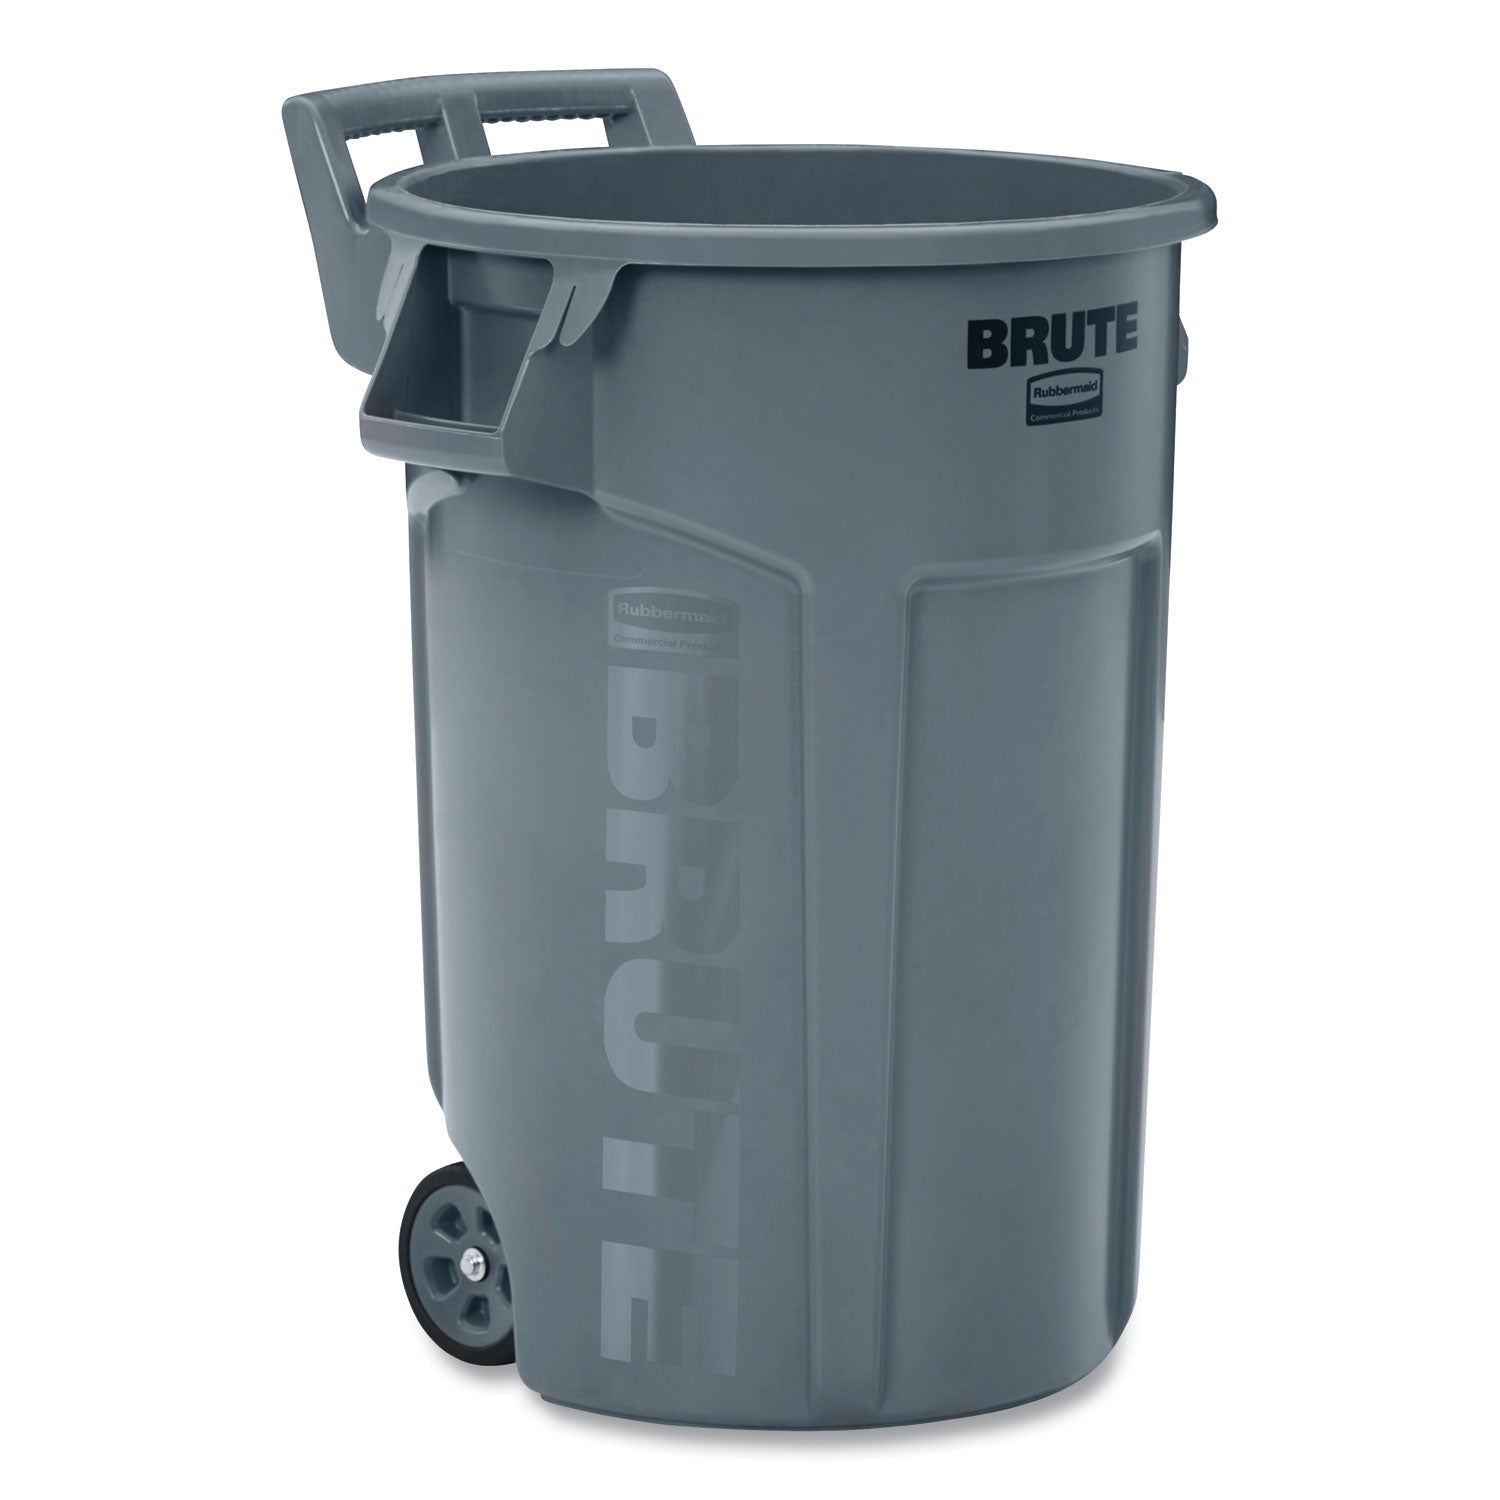 vented-wheeled-brute-container-44-gal-plastic-gray_rcp2131929 - 1